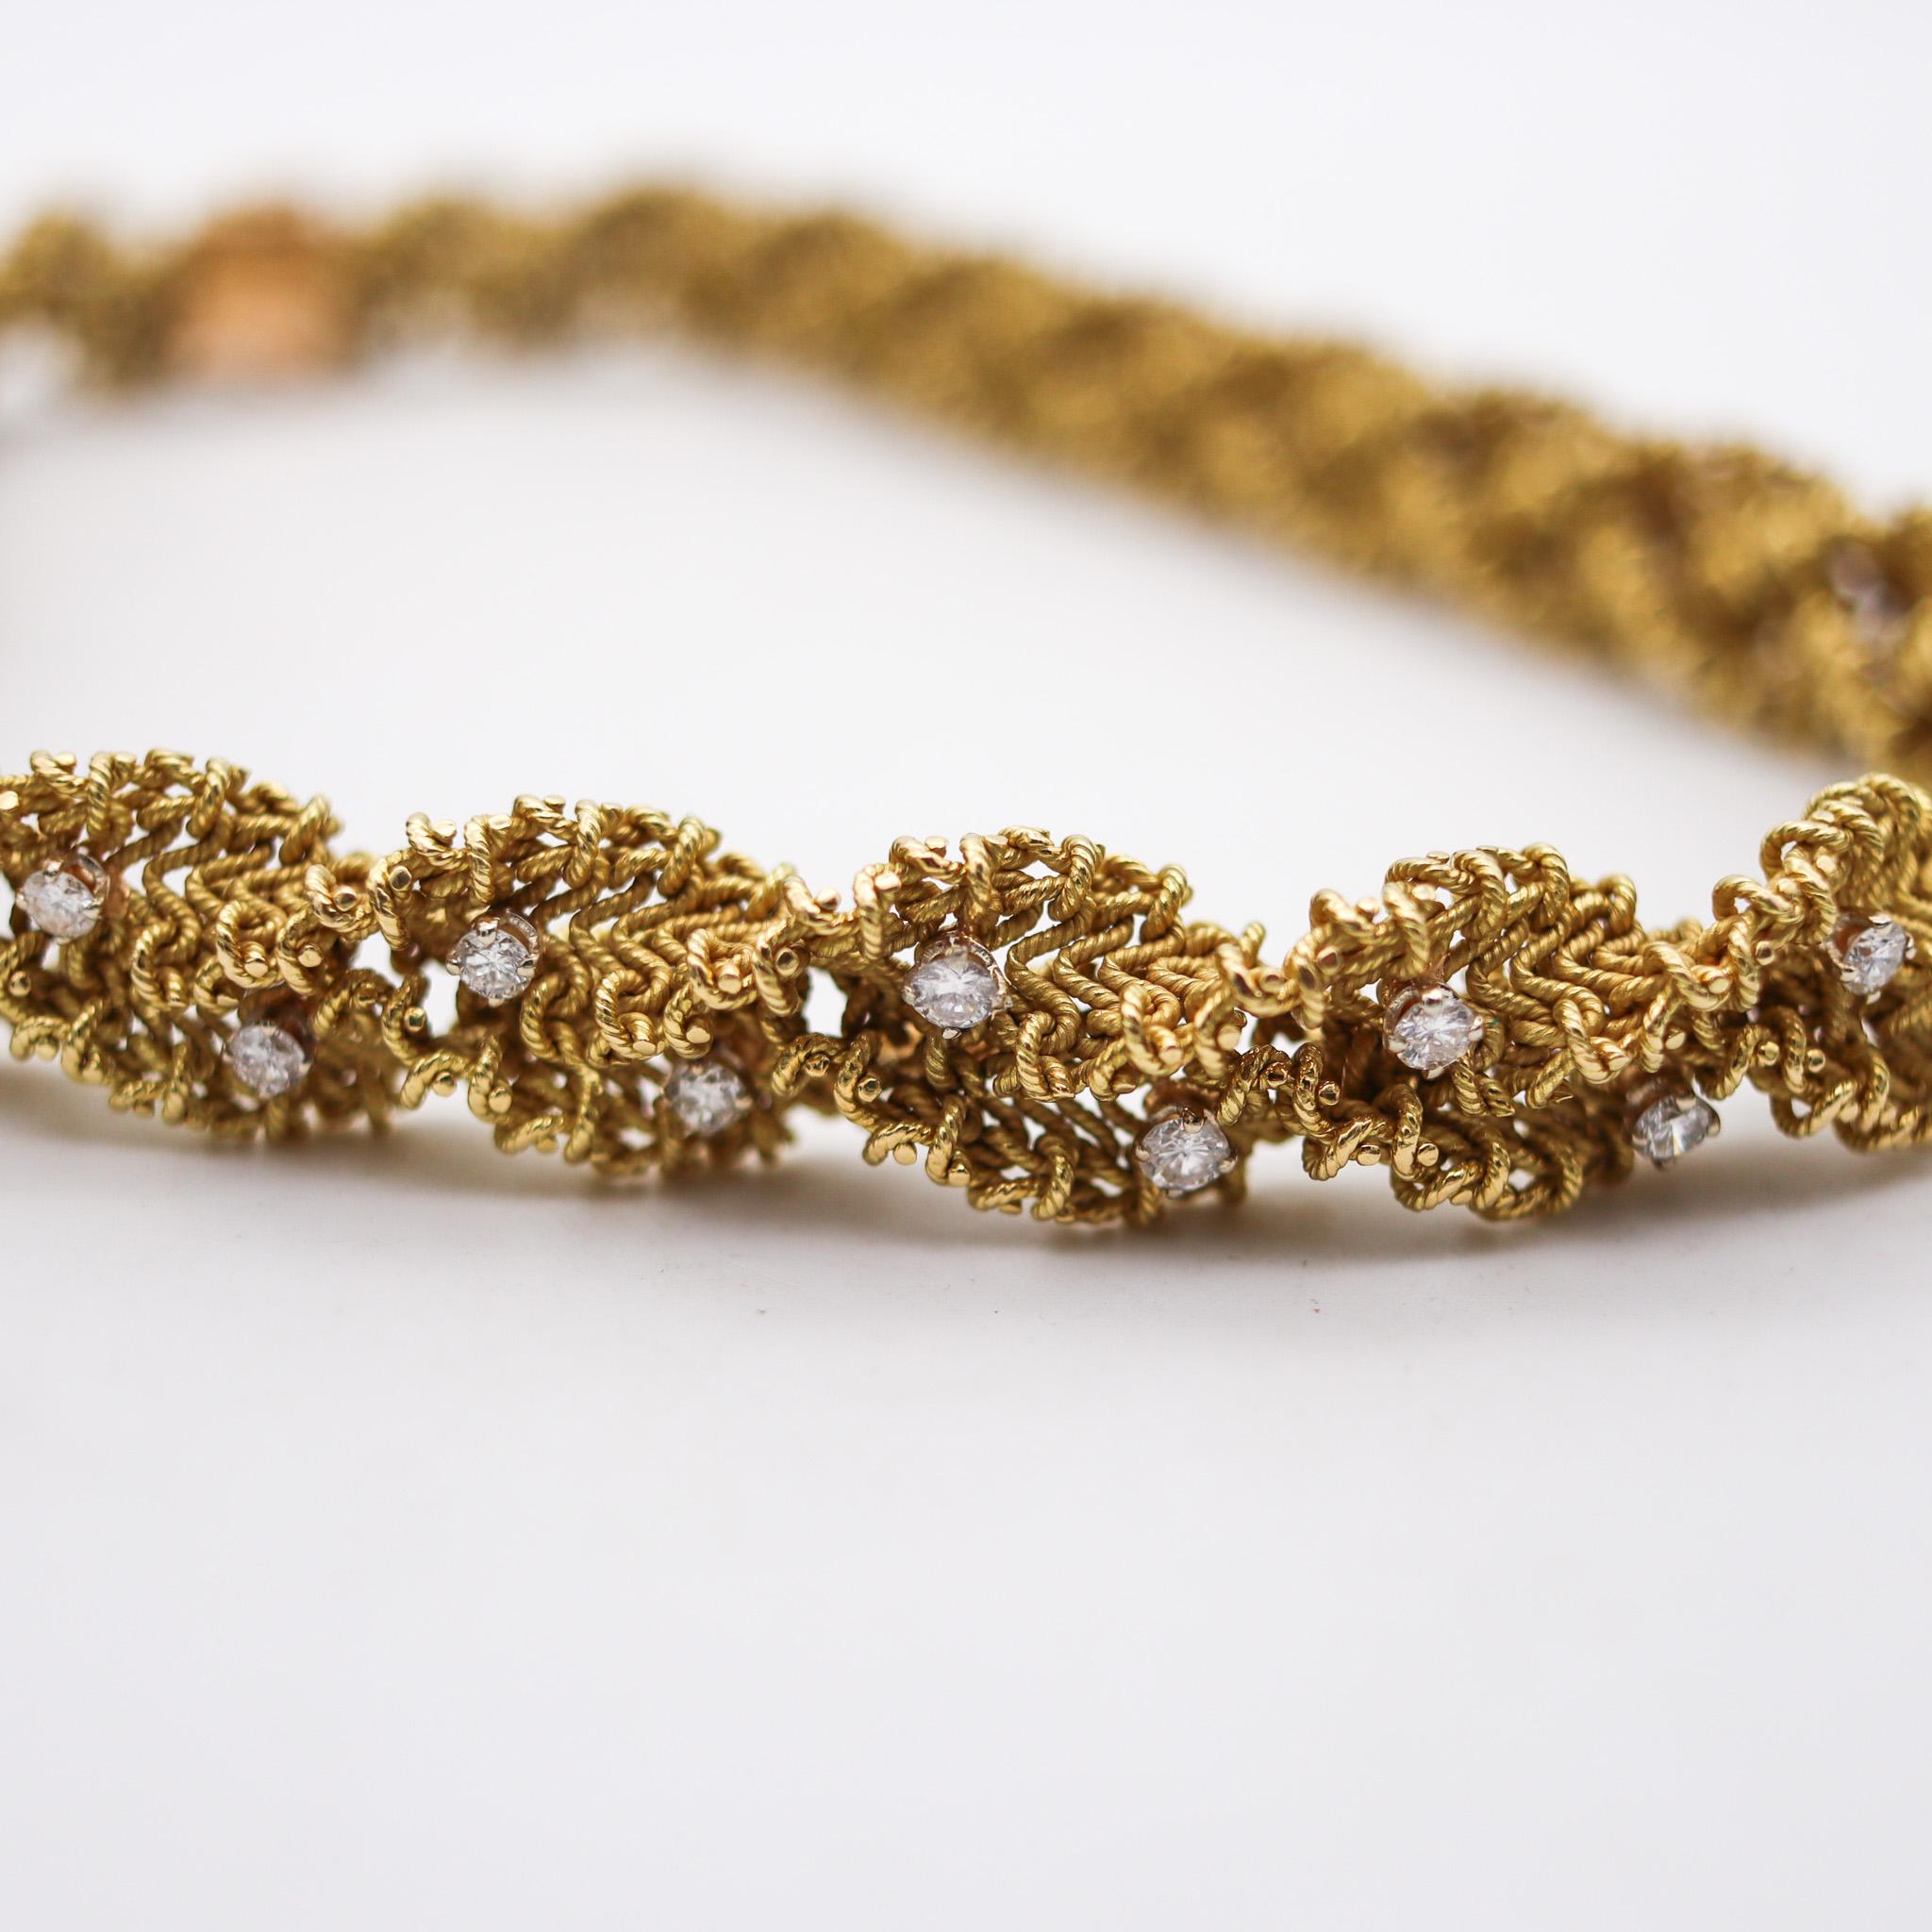 A necklace designed by Chantecler of Capri.

Fabulous statement twisted necklace, created in the island of Capri in Italy by the jewelry house of Chantecler during the mid century period, back in the 1960. This rare and beautiful vintage necklace